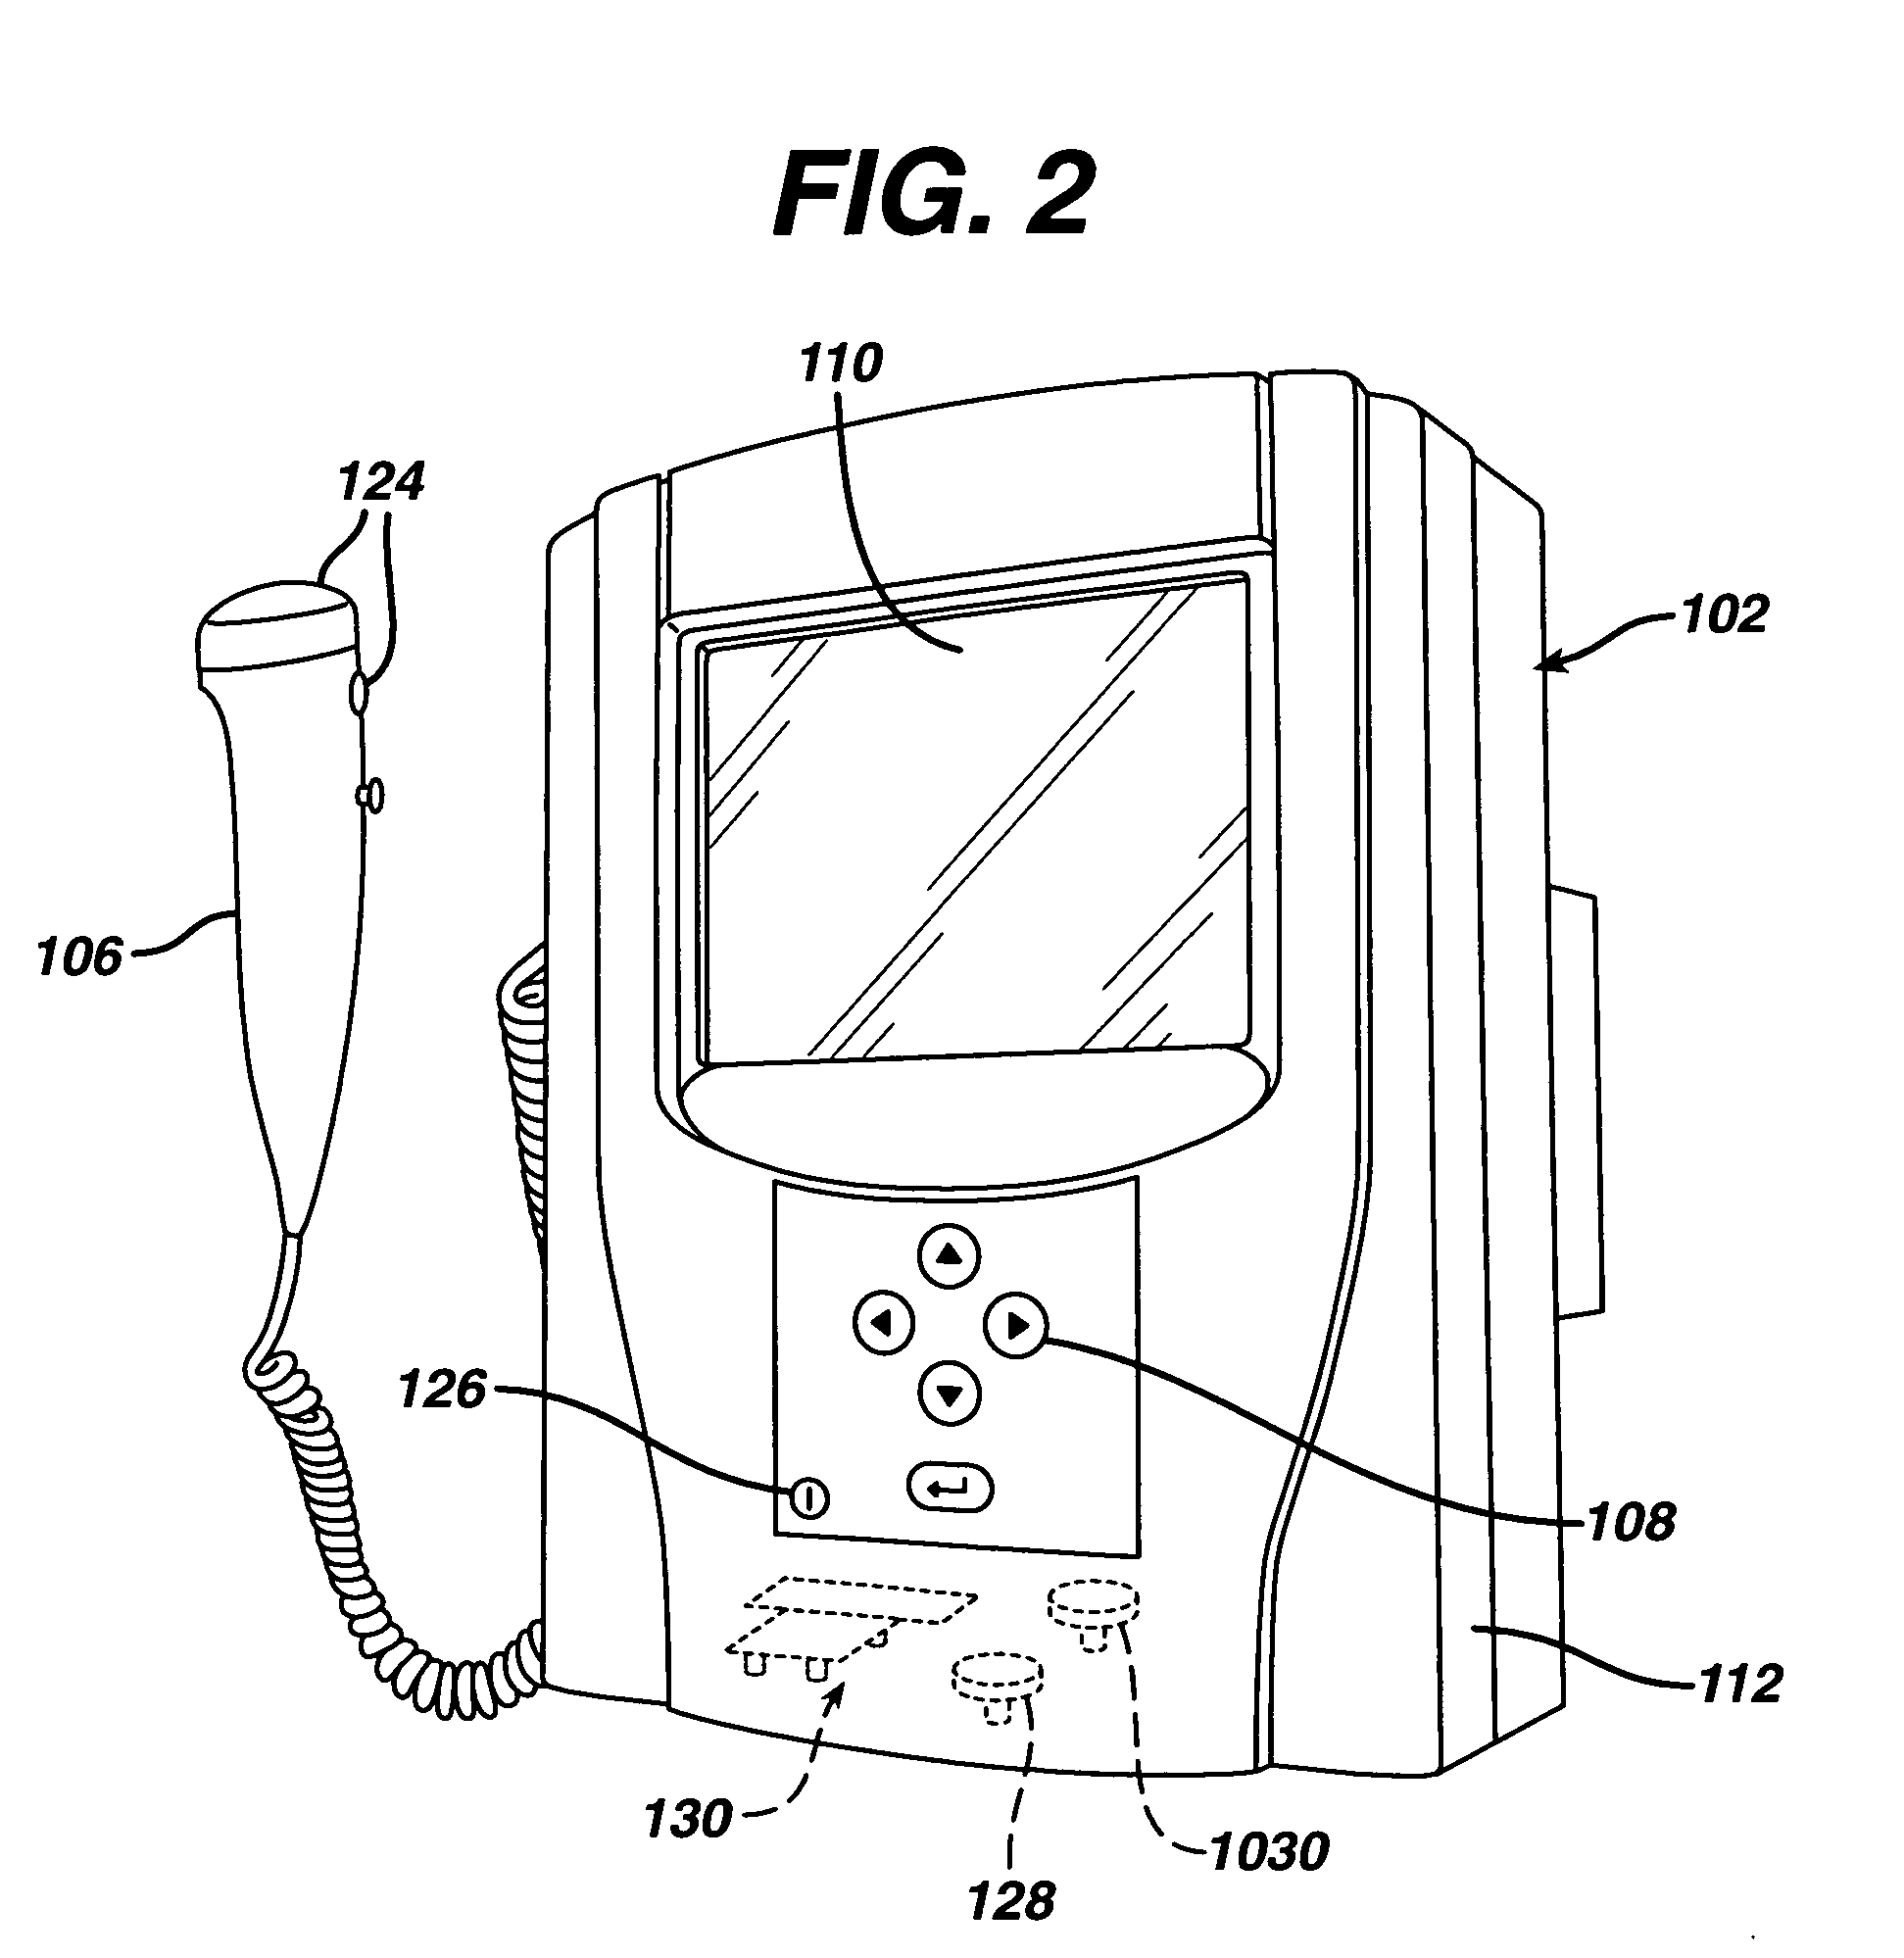 Portable system for assessing urinary function and peforming endometrial ablation